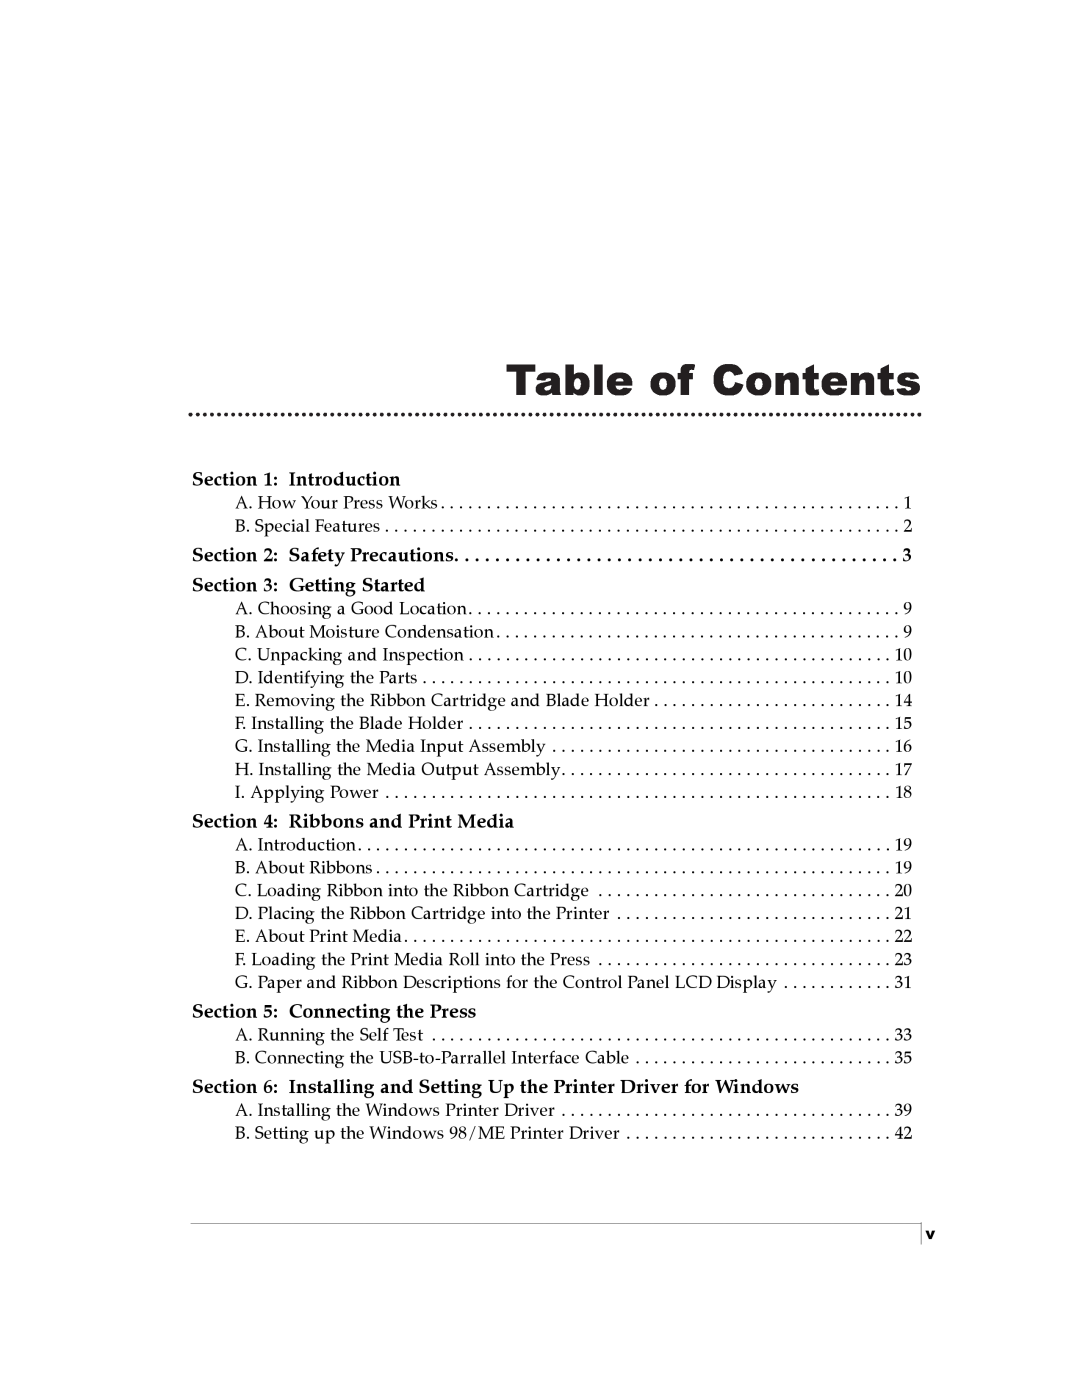 Primera Technology 510212 Table of Contents, Introduction, Safety Precautions Getting Started, Ribbons and Print Media 